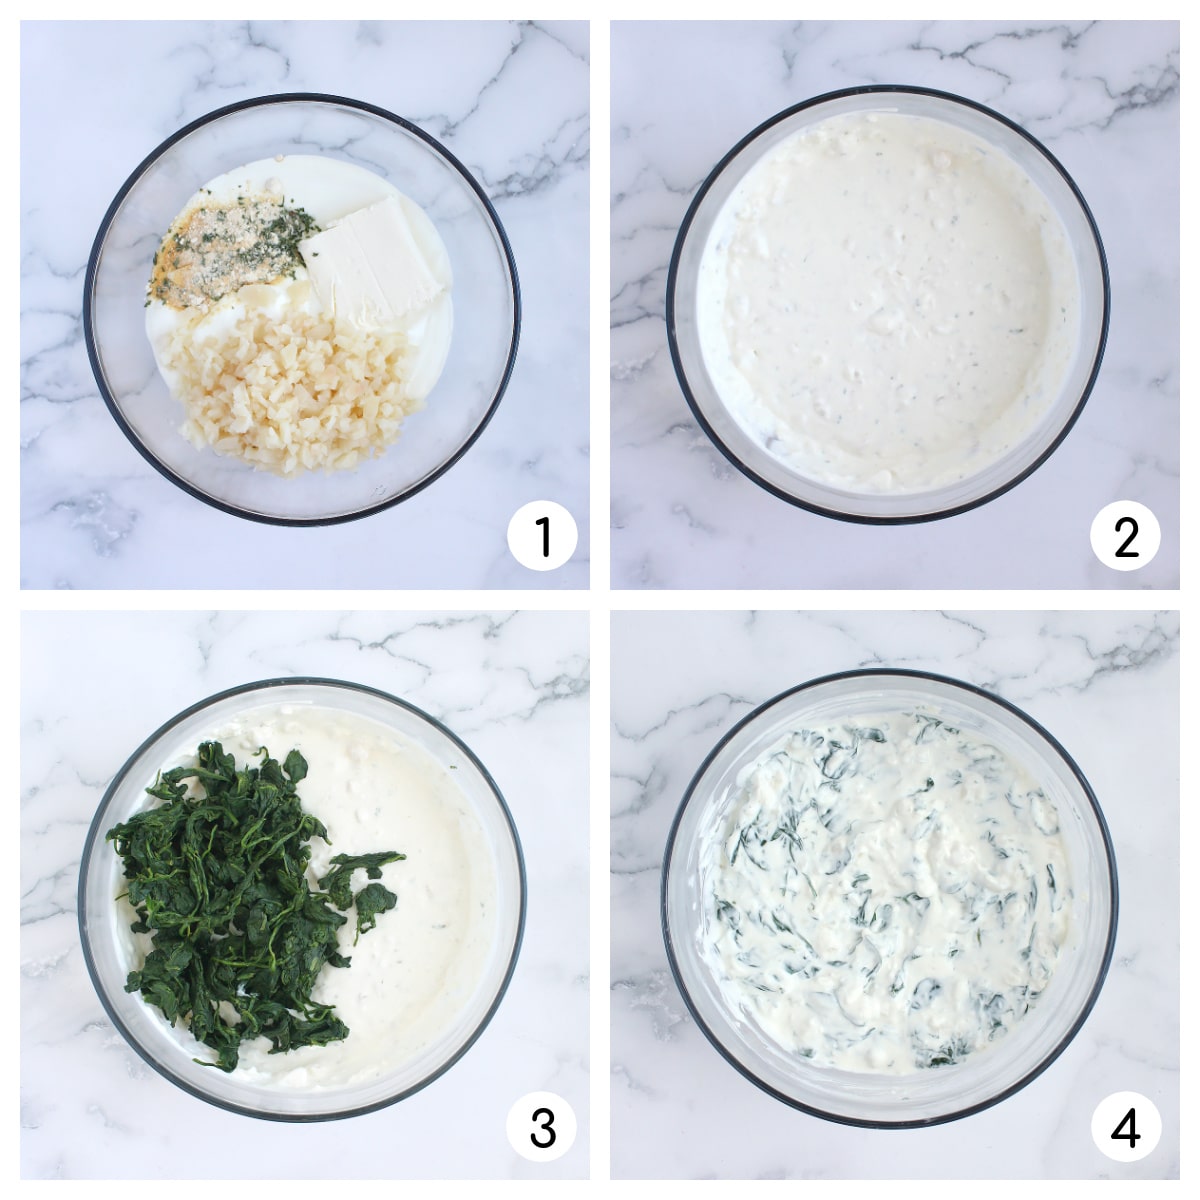 Process shots on how to make a healthy spinach dip.